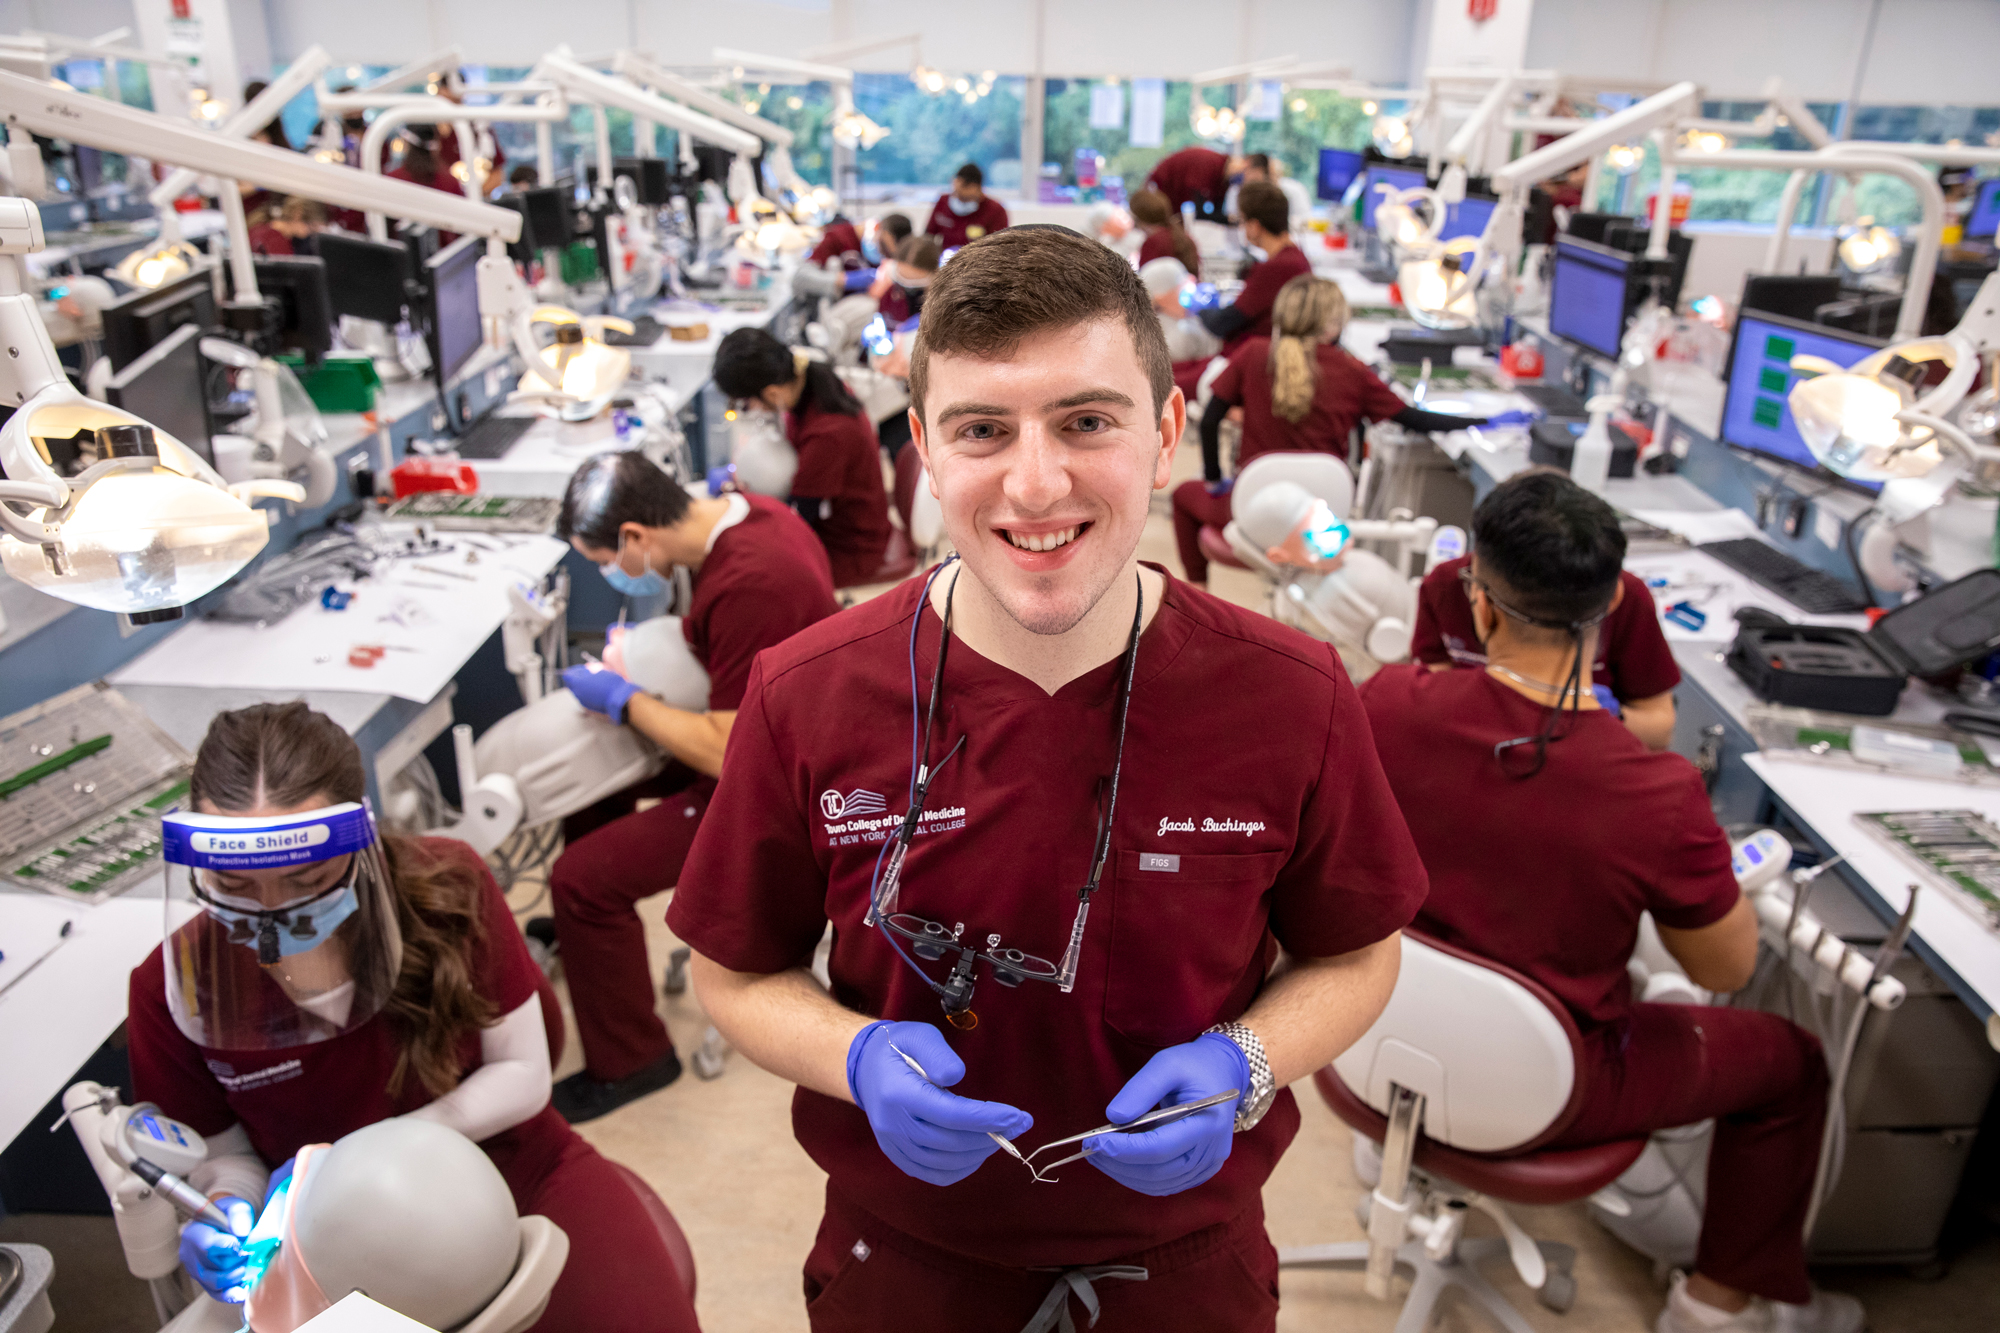 Jacob Buchinger smiling and holding dental tools in front of peers in dental practice lab